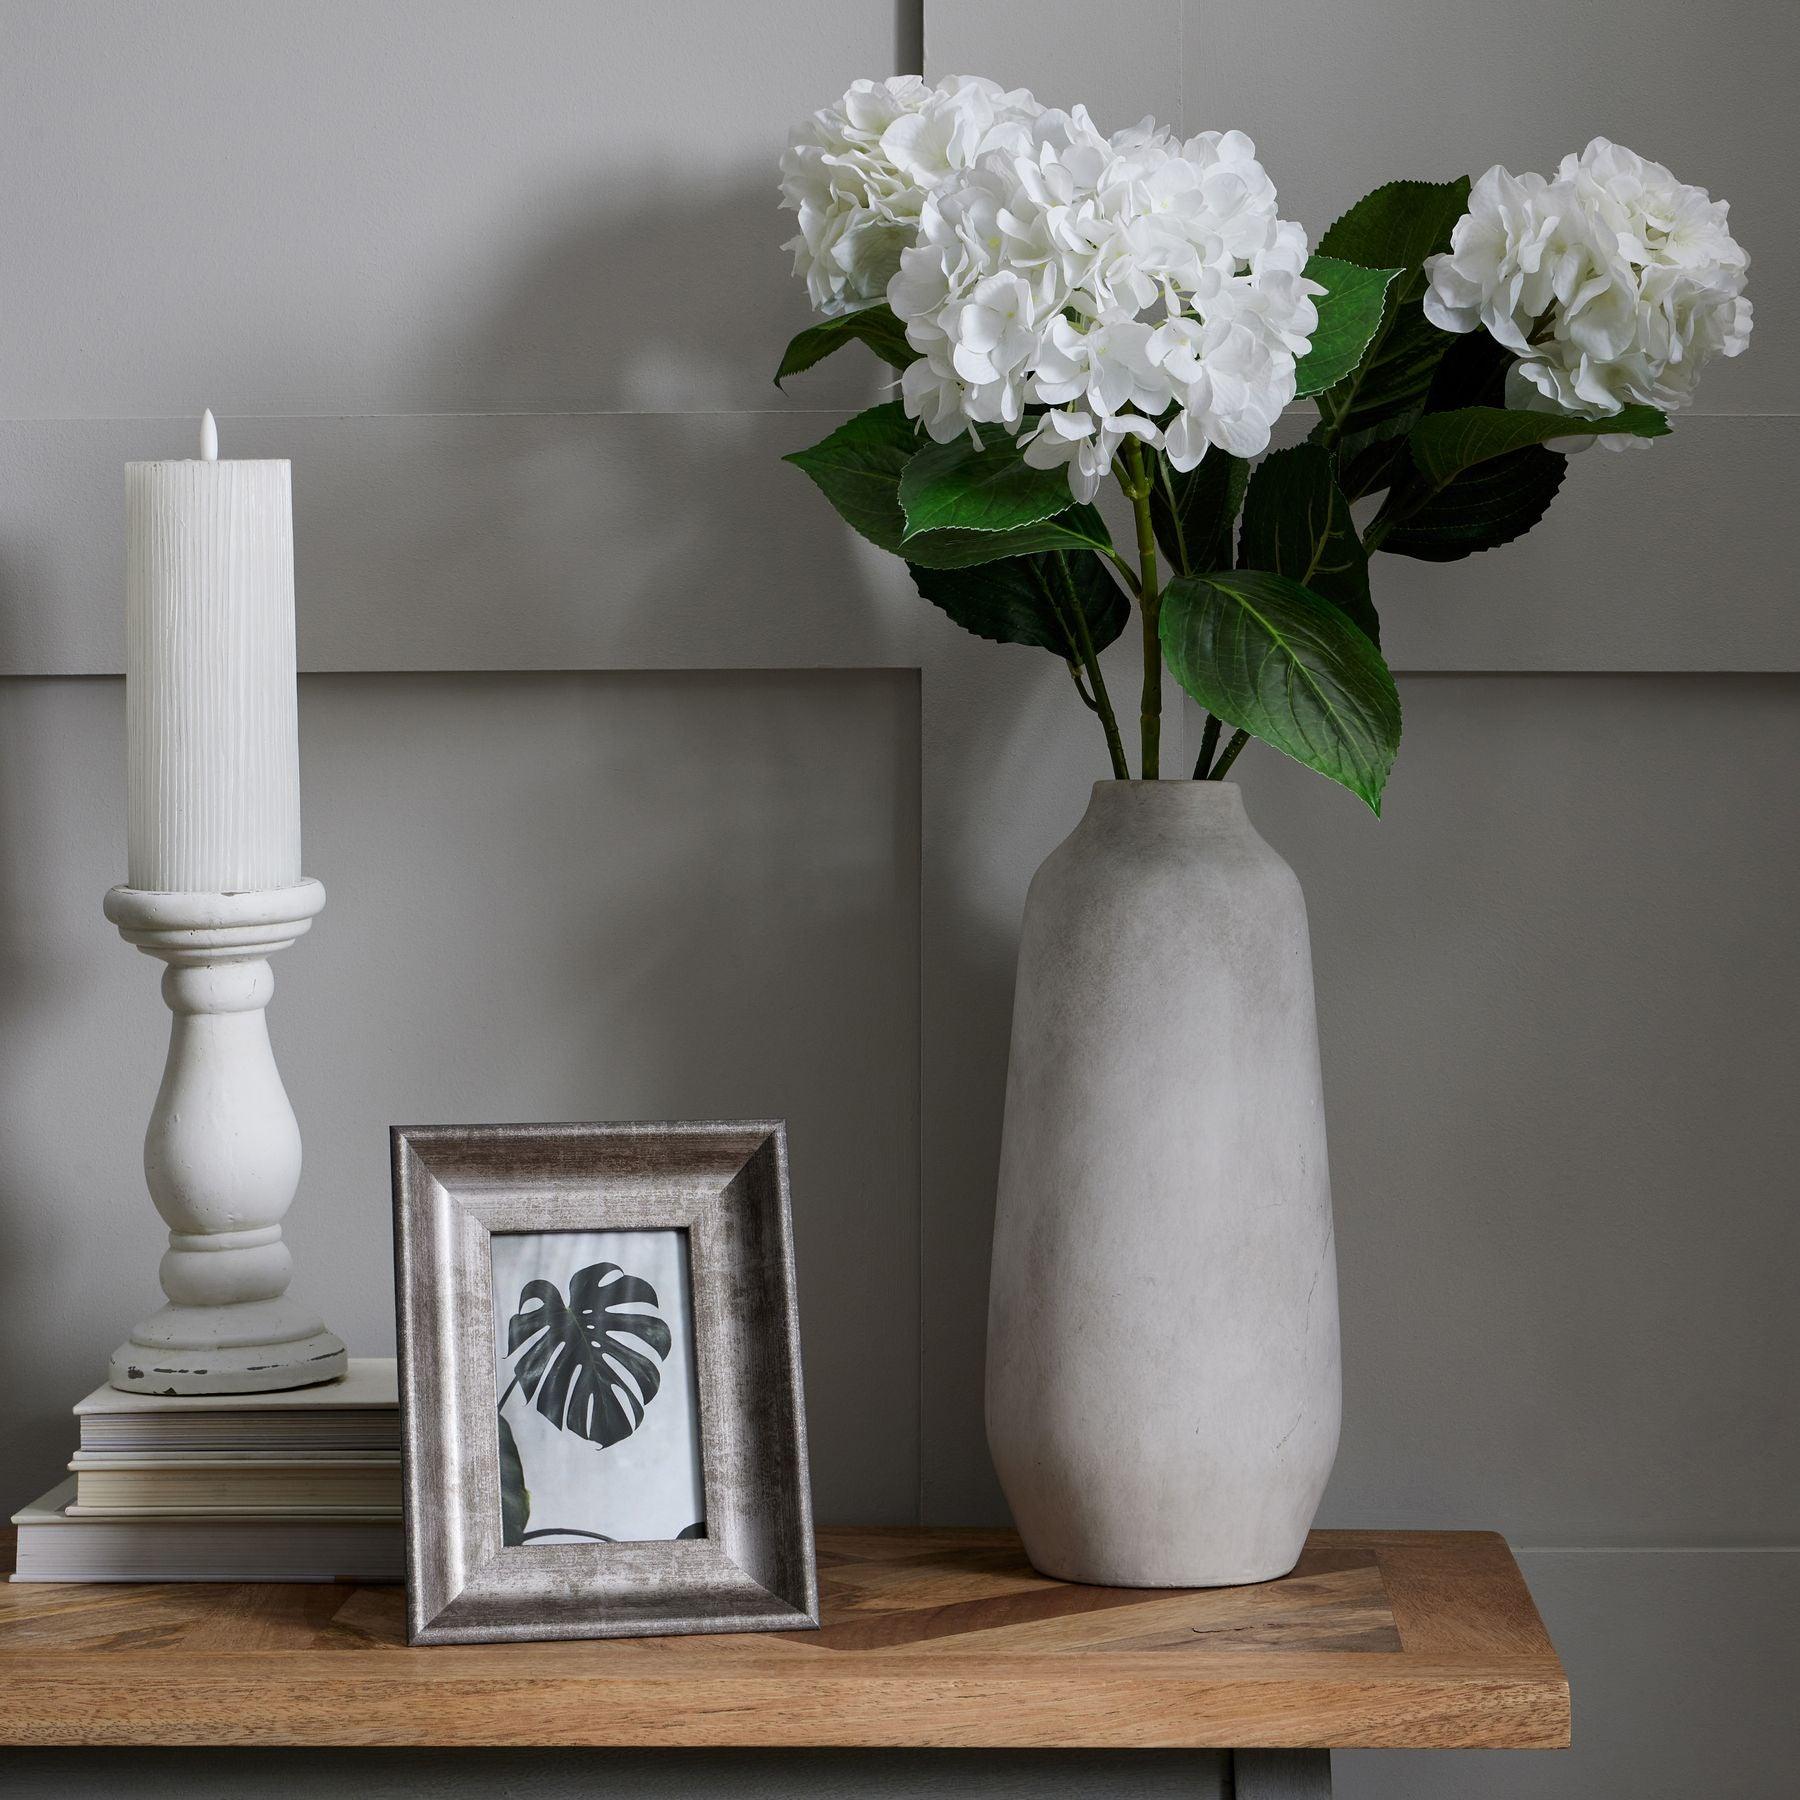 Small Matt White Ceramic Candle Holder-Gifts & Accessories > Candle Holders > Ornaments